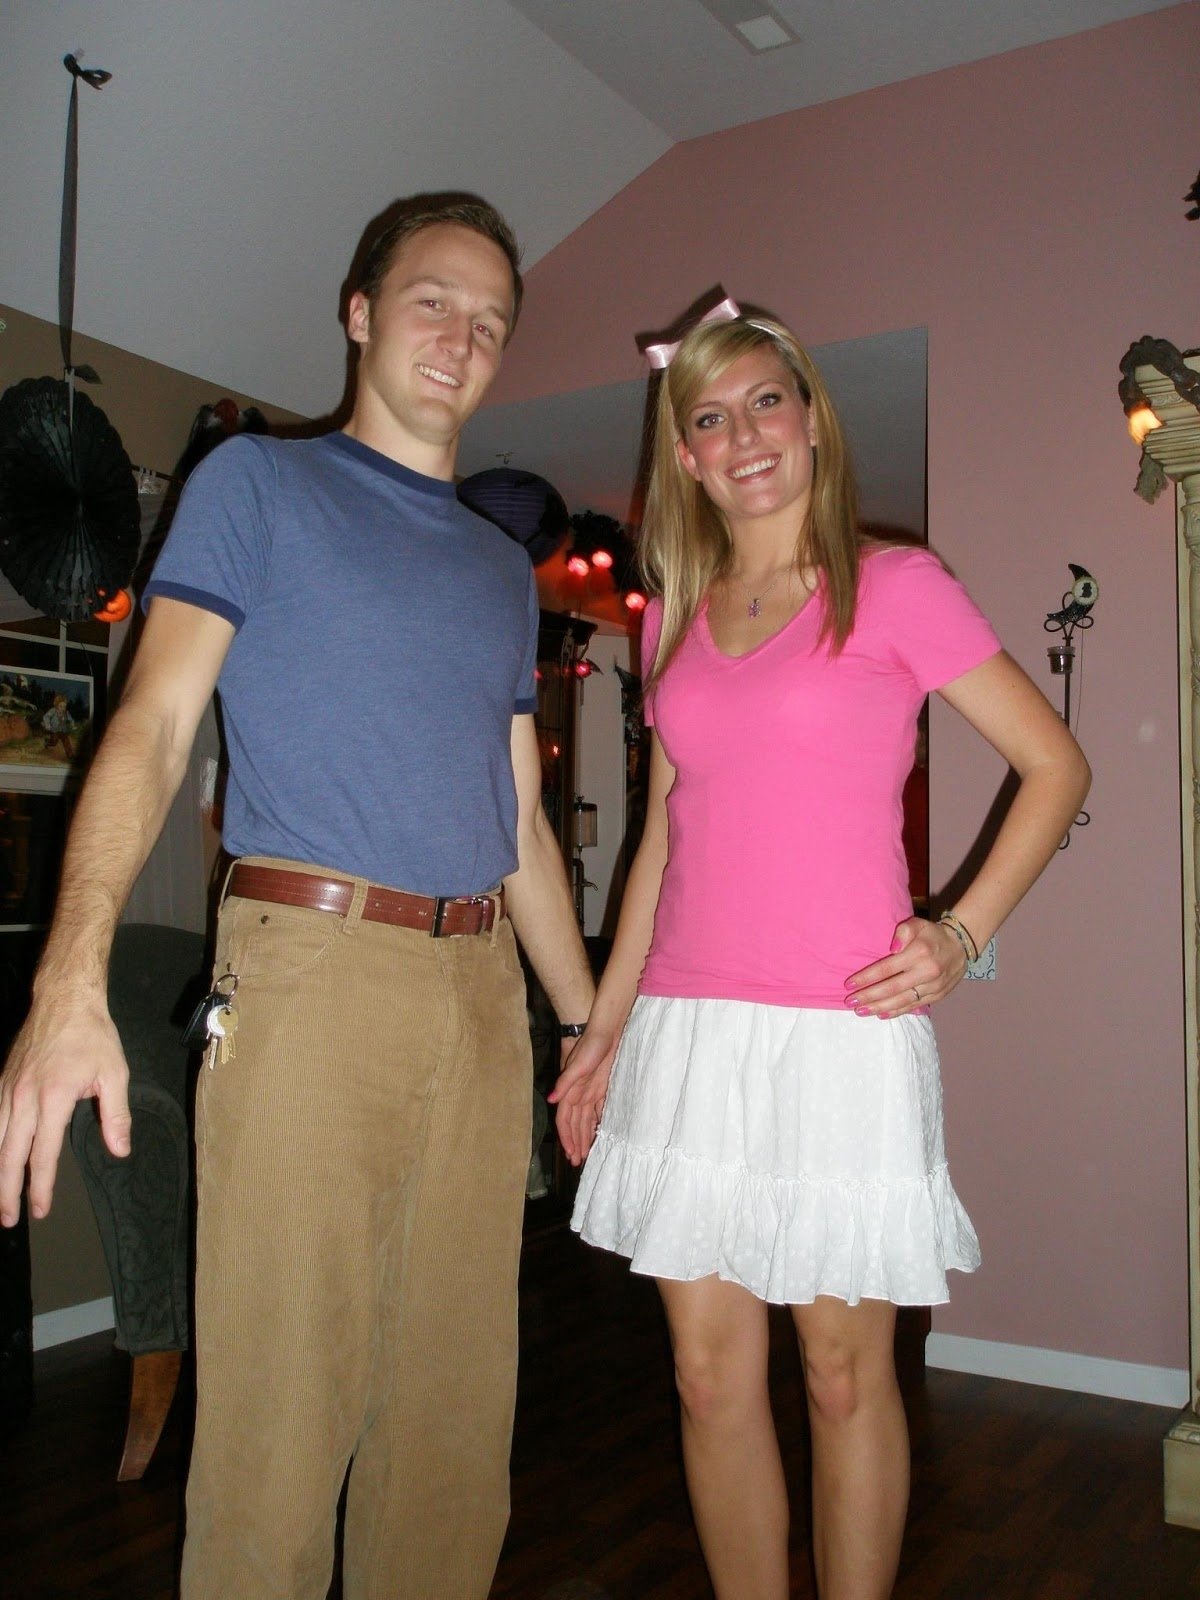 10 Pretty Funny Costume Ideas For Couples 57 couples diy costumes katie in kansas diy couples halloween 3 2022